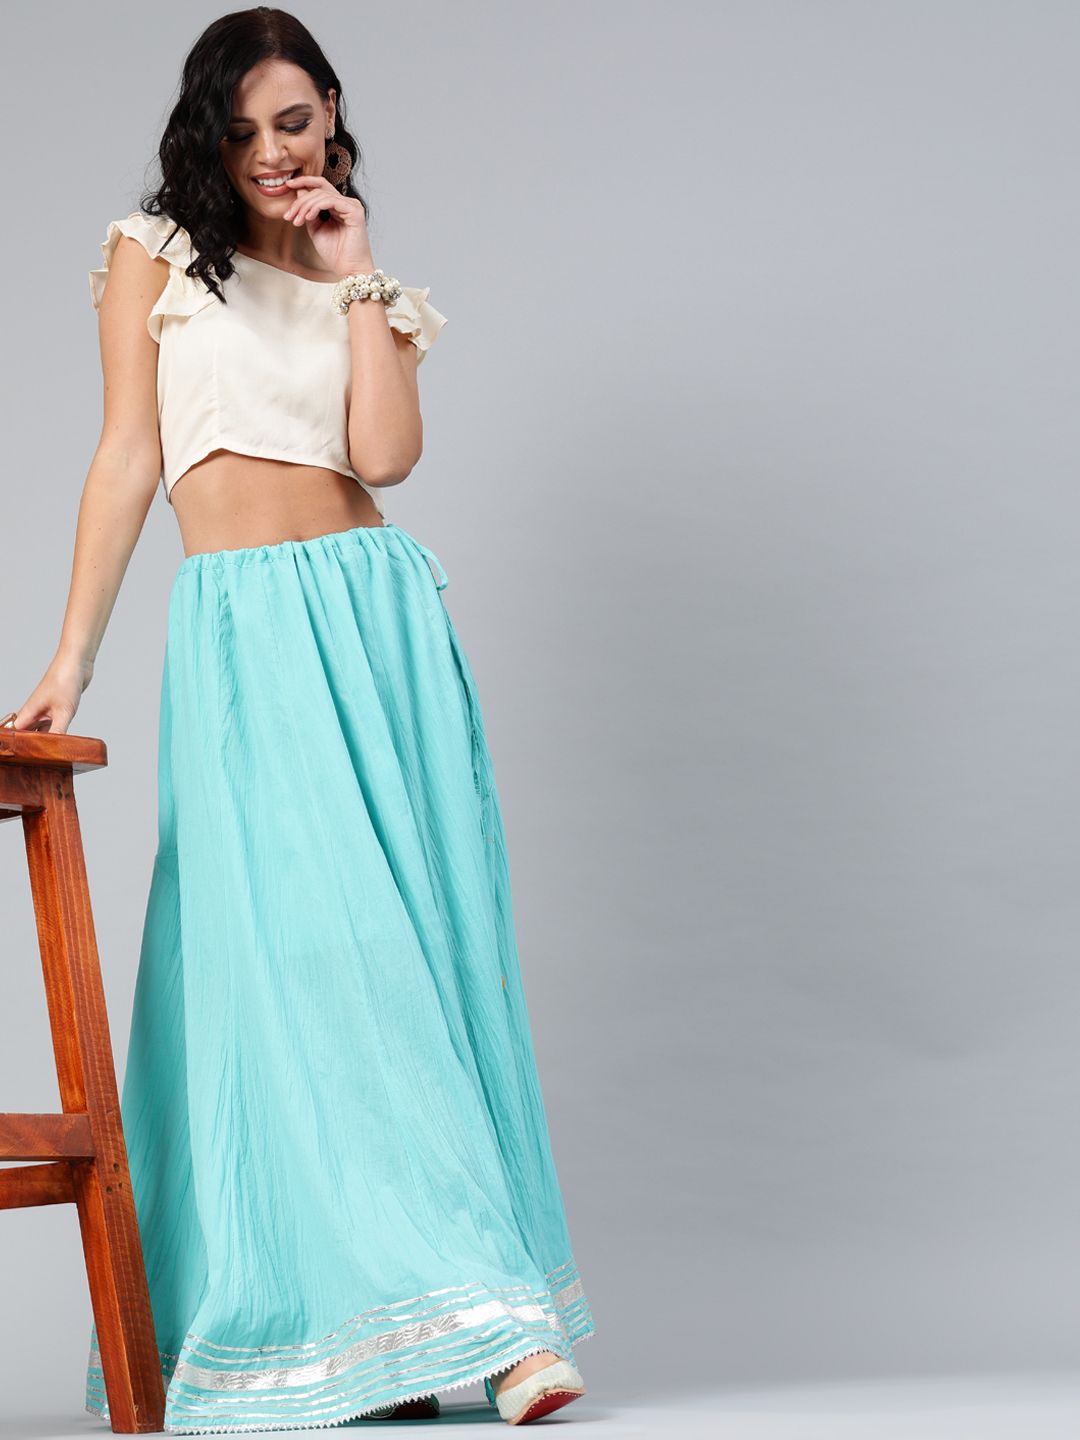 Geroo Jaipur Hand Crafted flared Aqua Blue Pure Cotton Skirt with White Crop Top Price in India